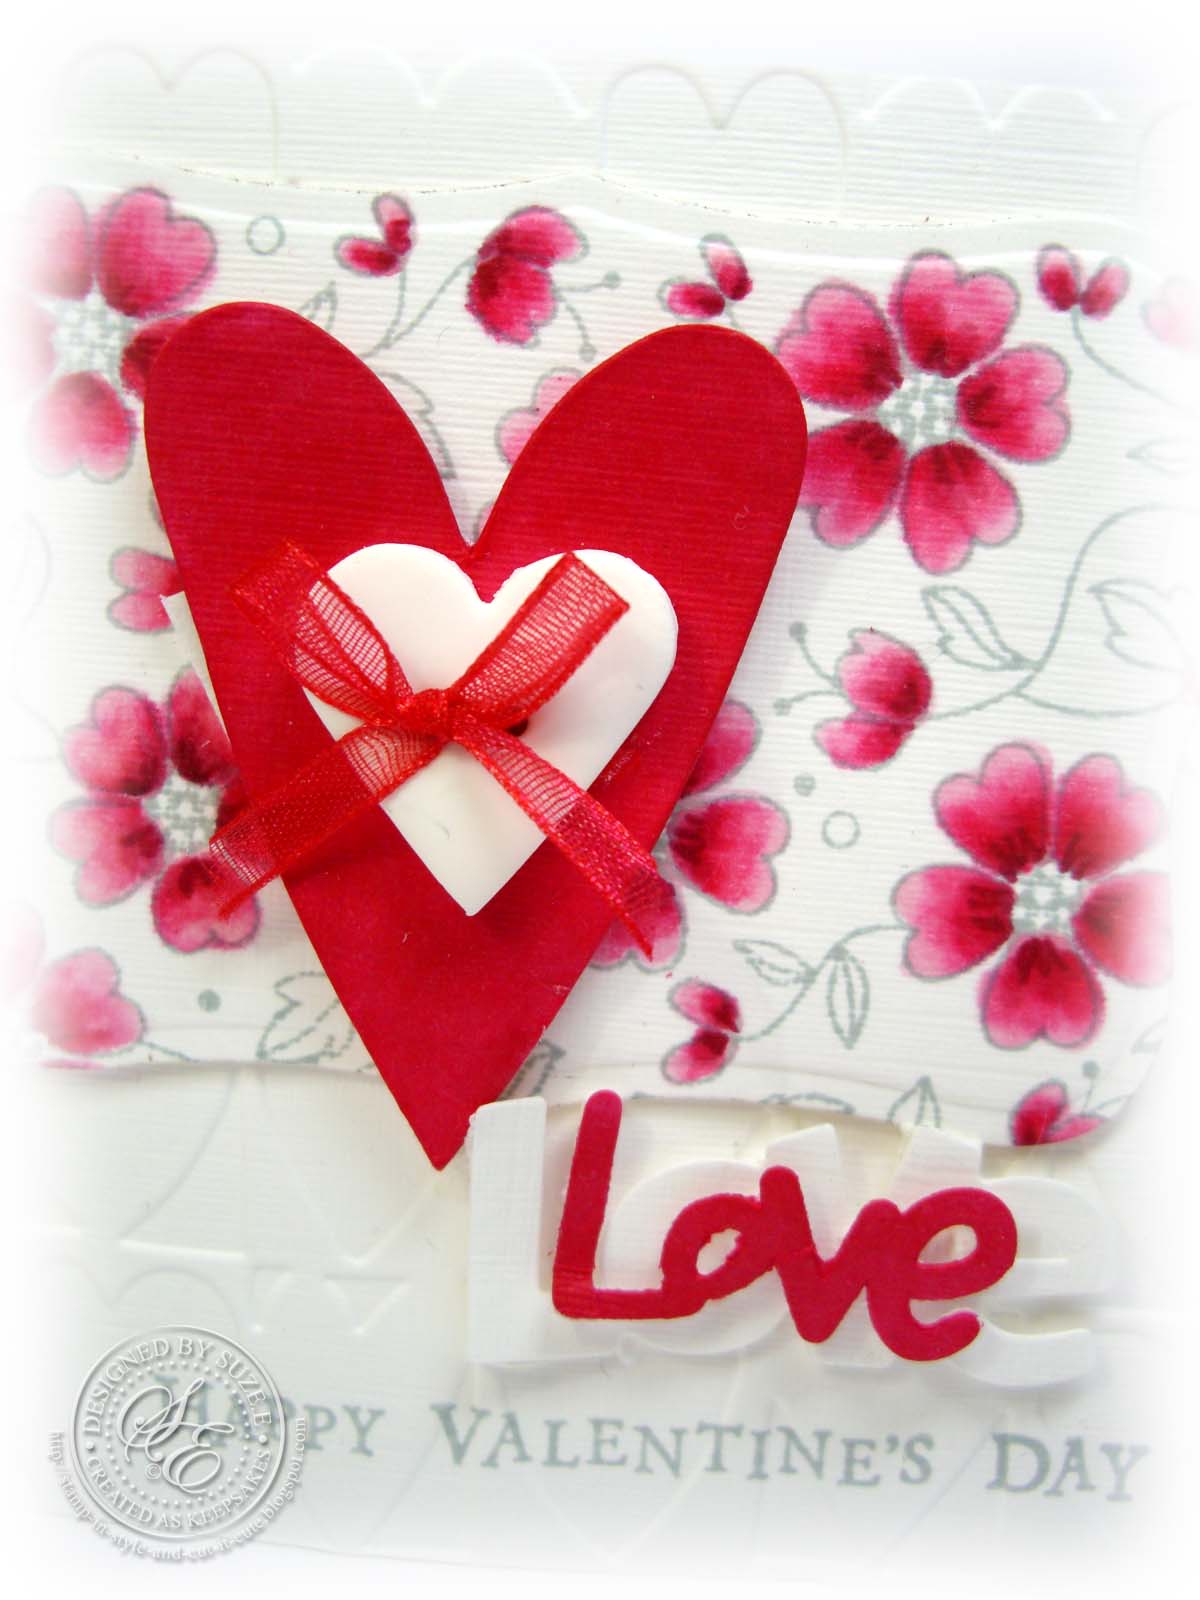 My red heart is cut from a Tim Holtz Sizzix Die and I've shaded it ...